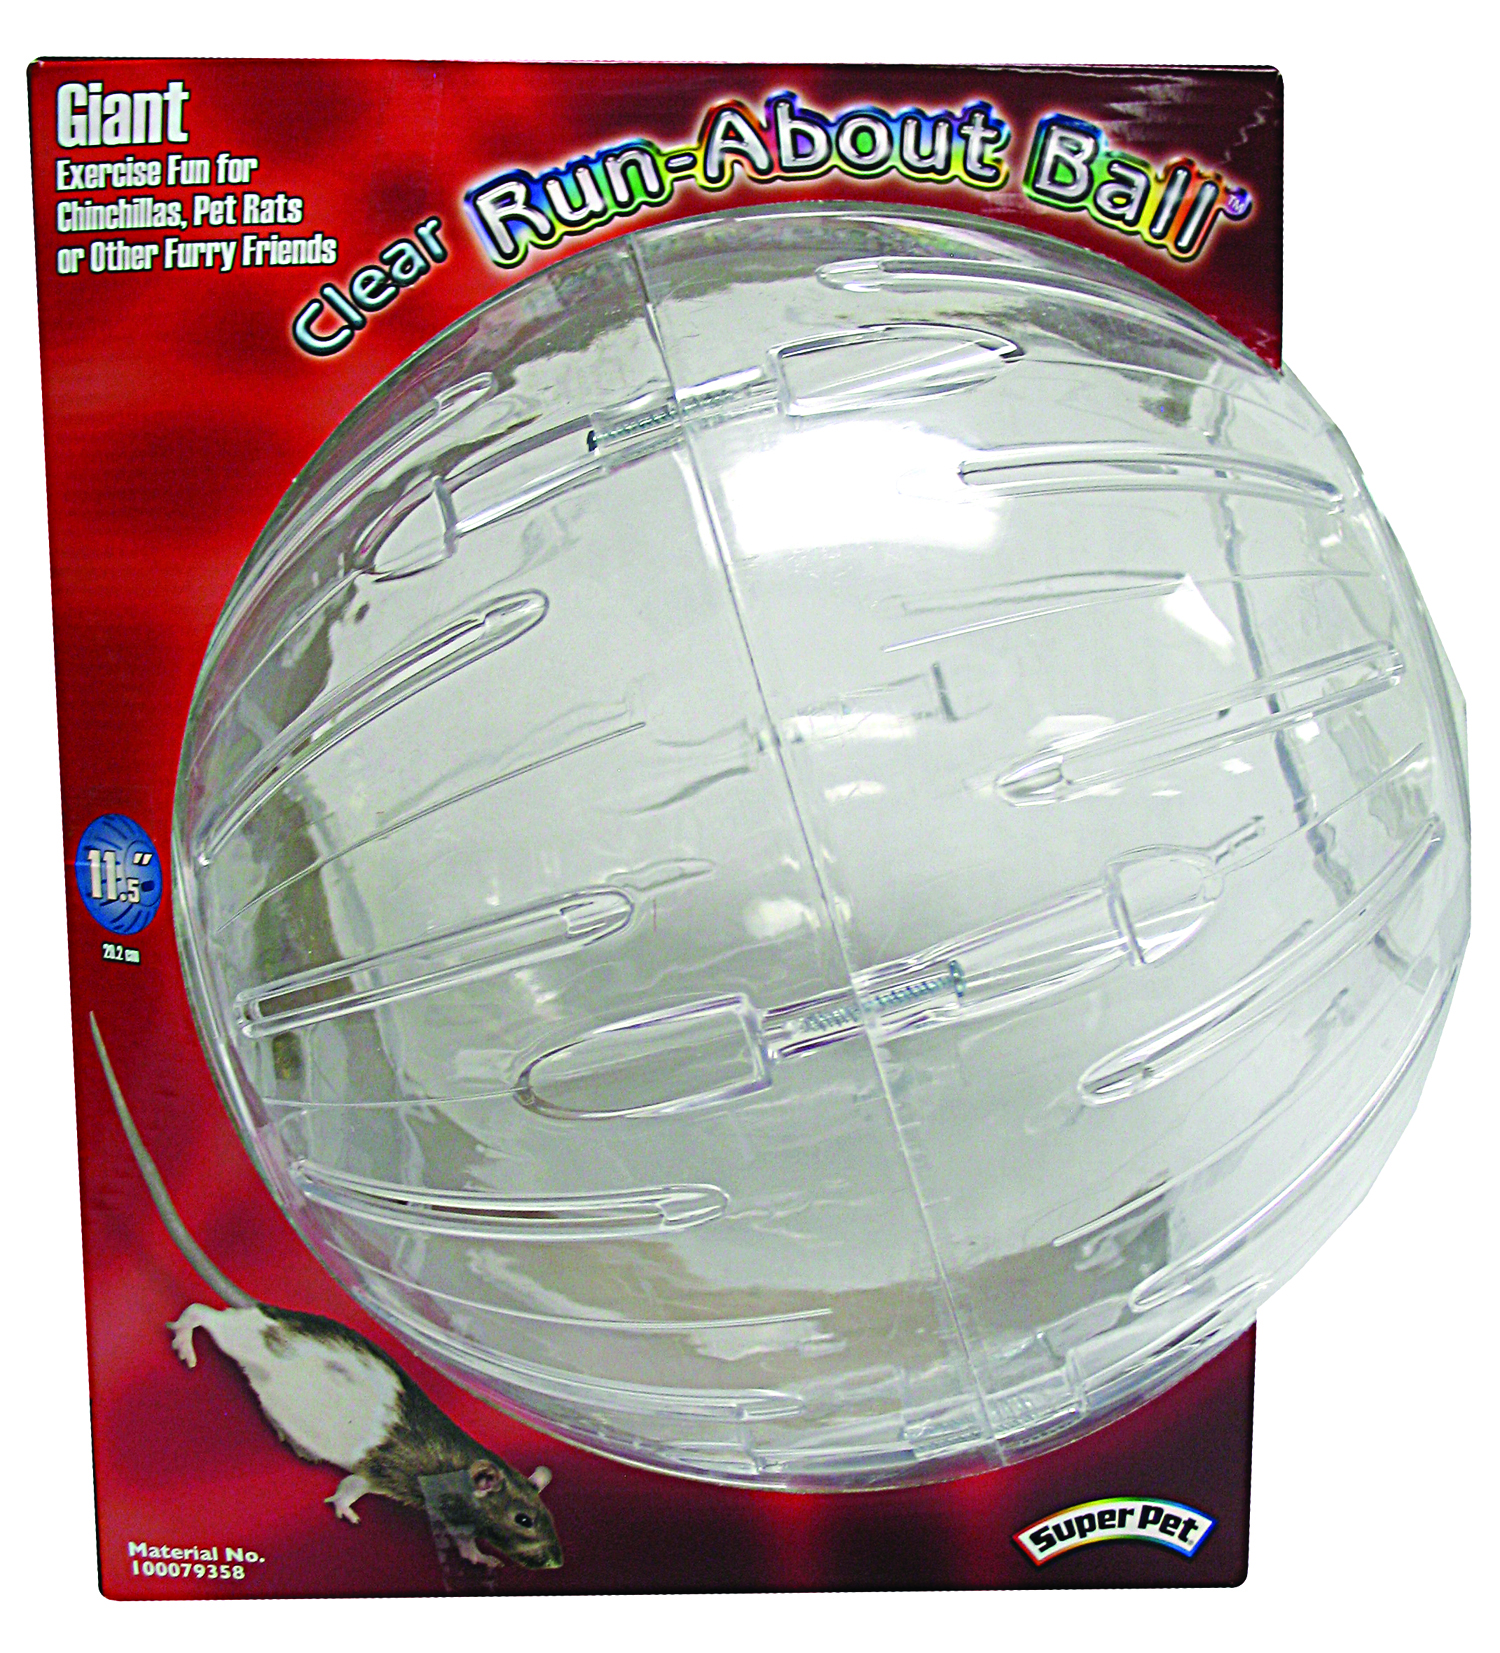 Giant Run-about Ball, Clear